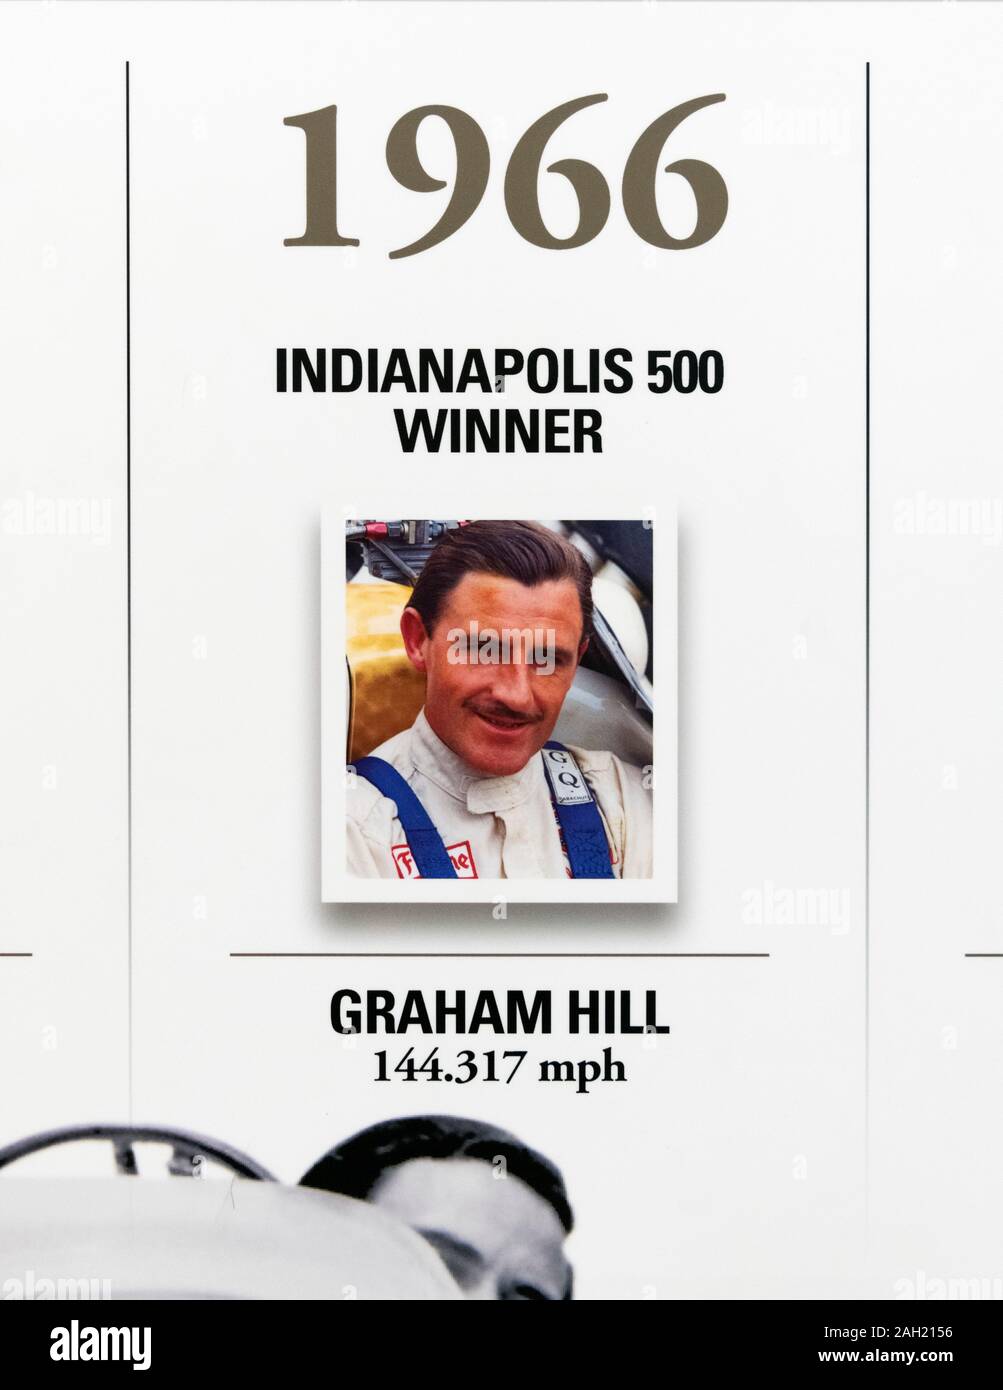 Graham Hill, winner of the 1966 Indy 500, on the Wall of Winners at the Indianapolis Motor Speedway Museum, Indianapolis, Indiana, USA. Stock Photo